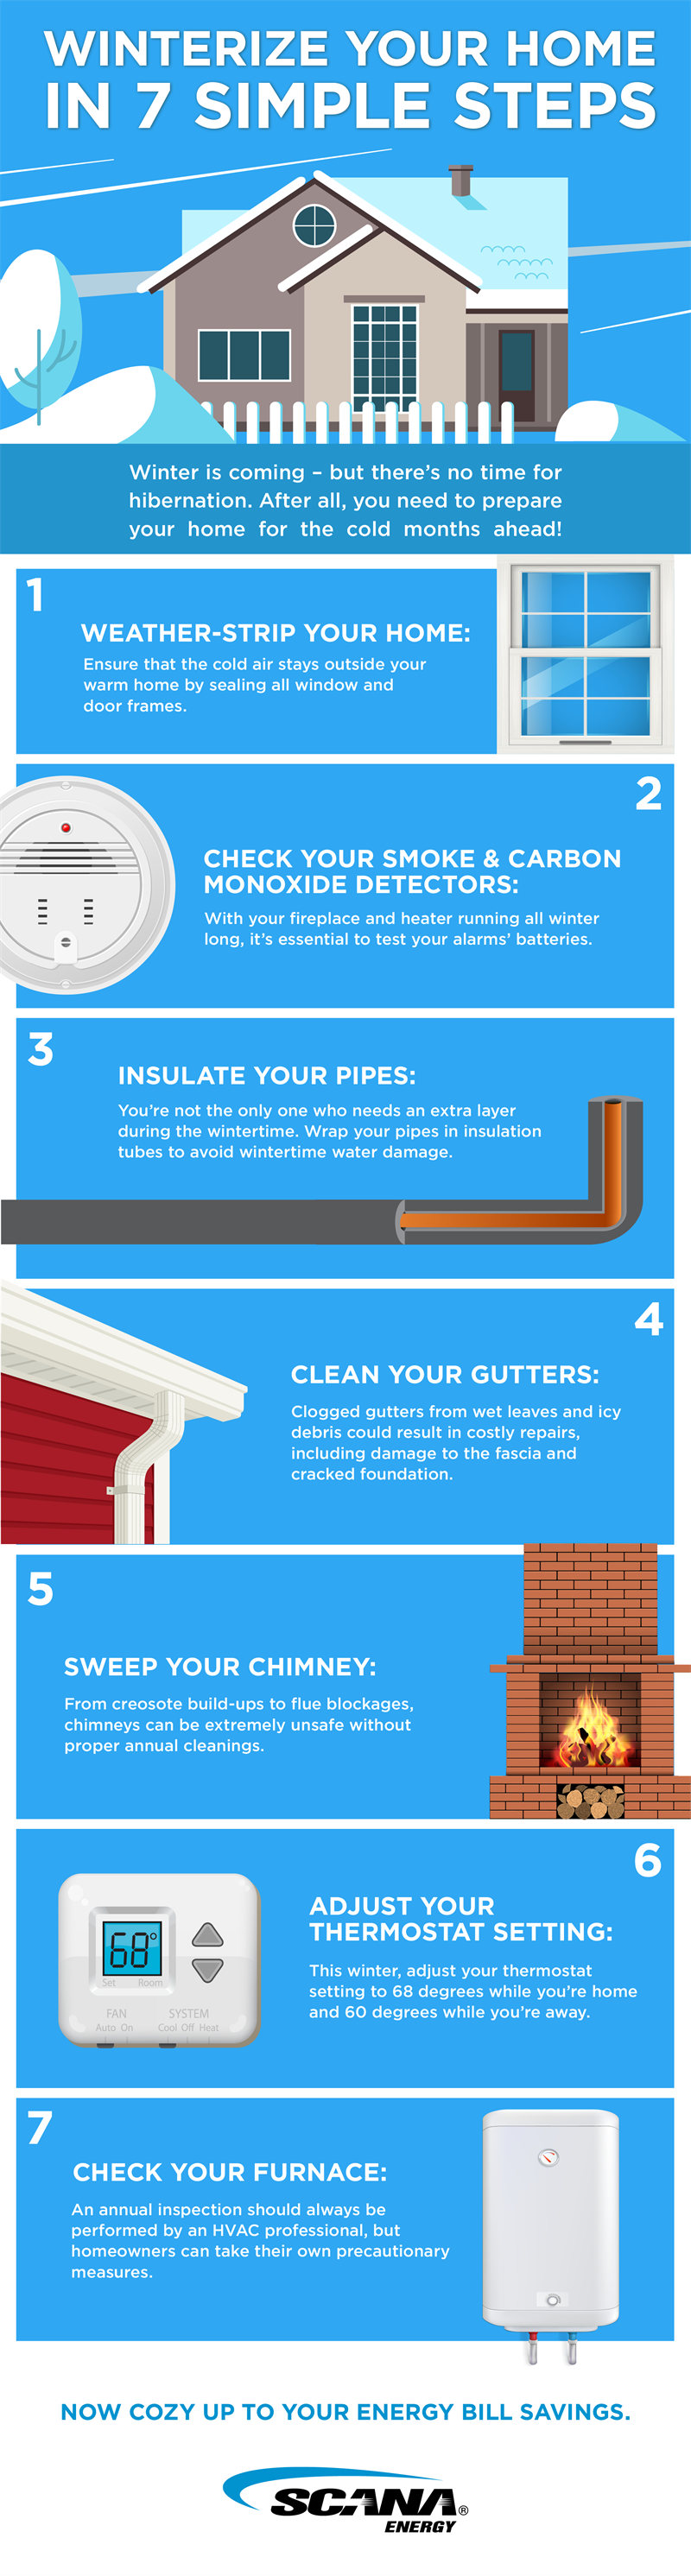 Winterize Your Home in 7 Simple Steps